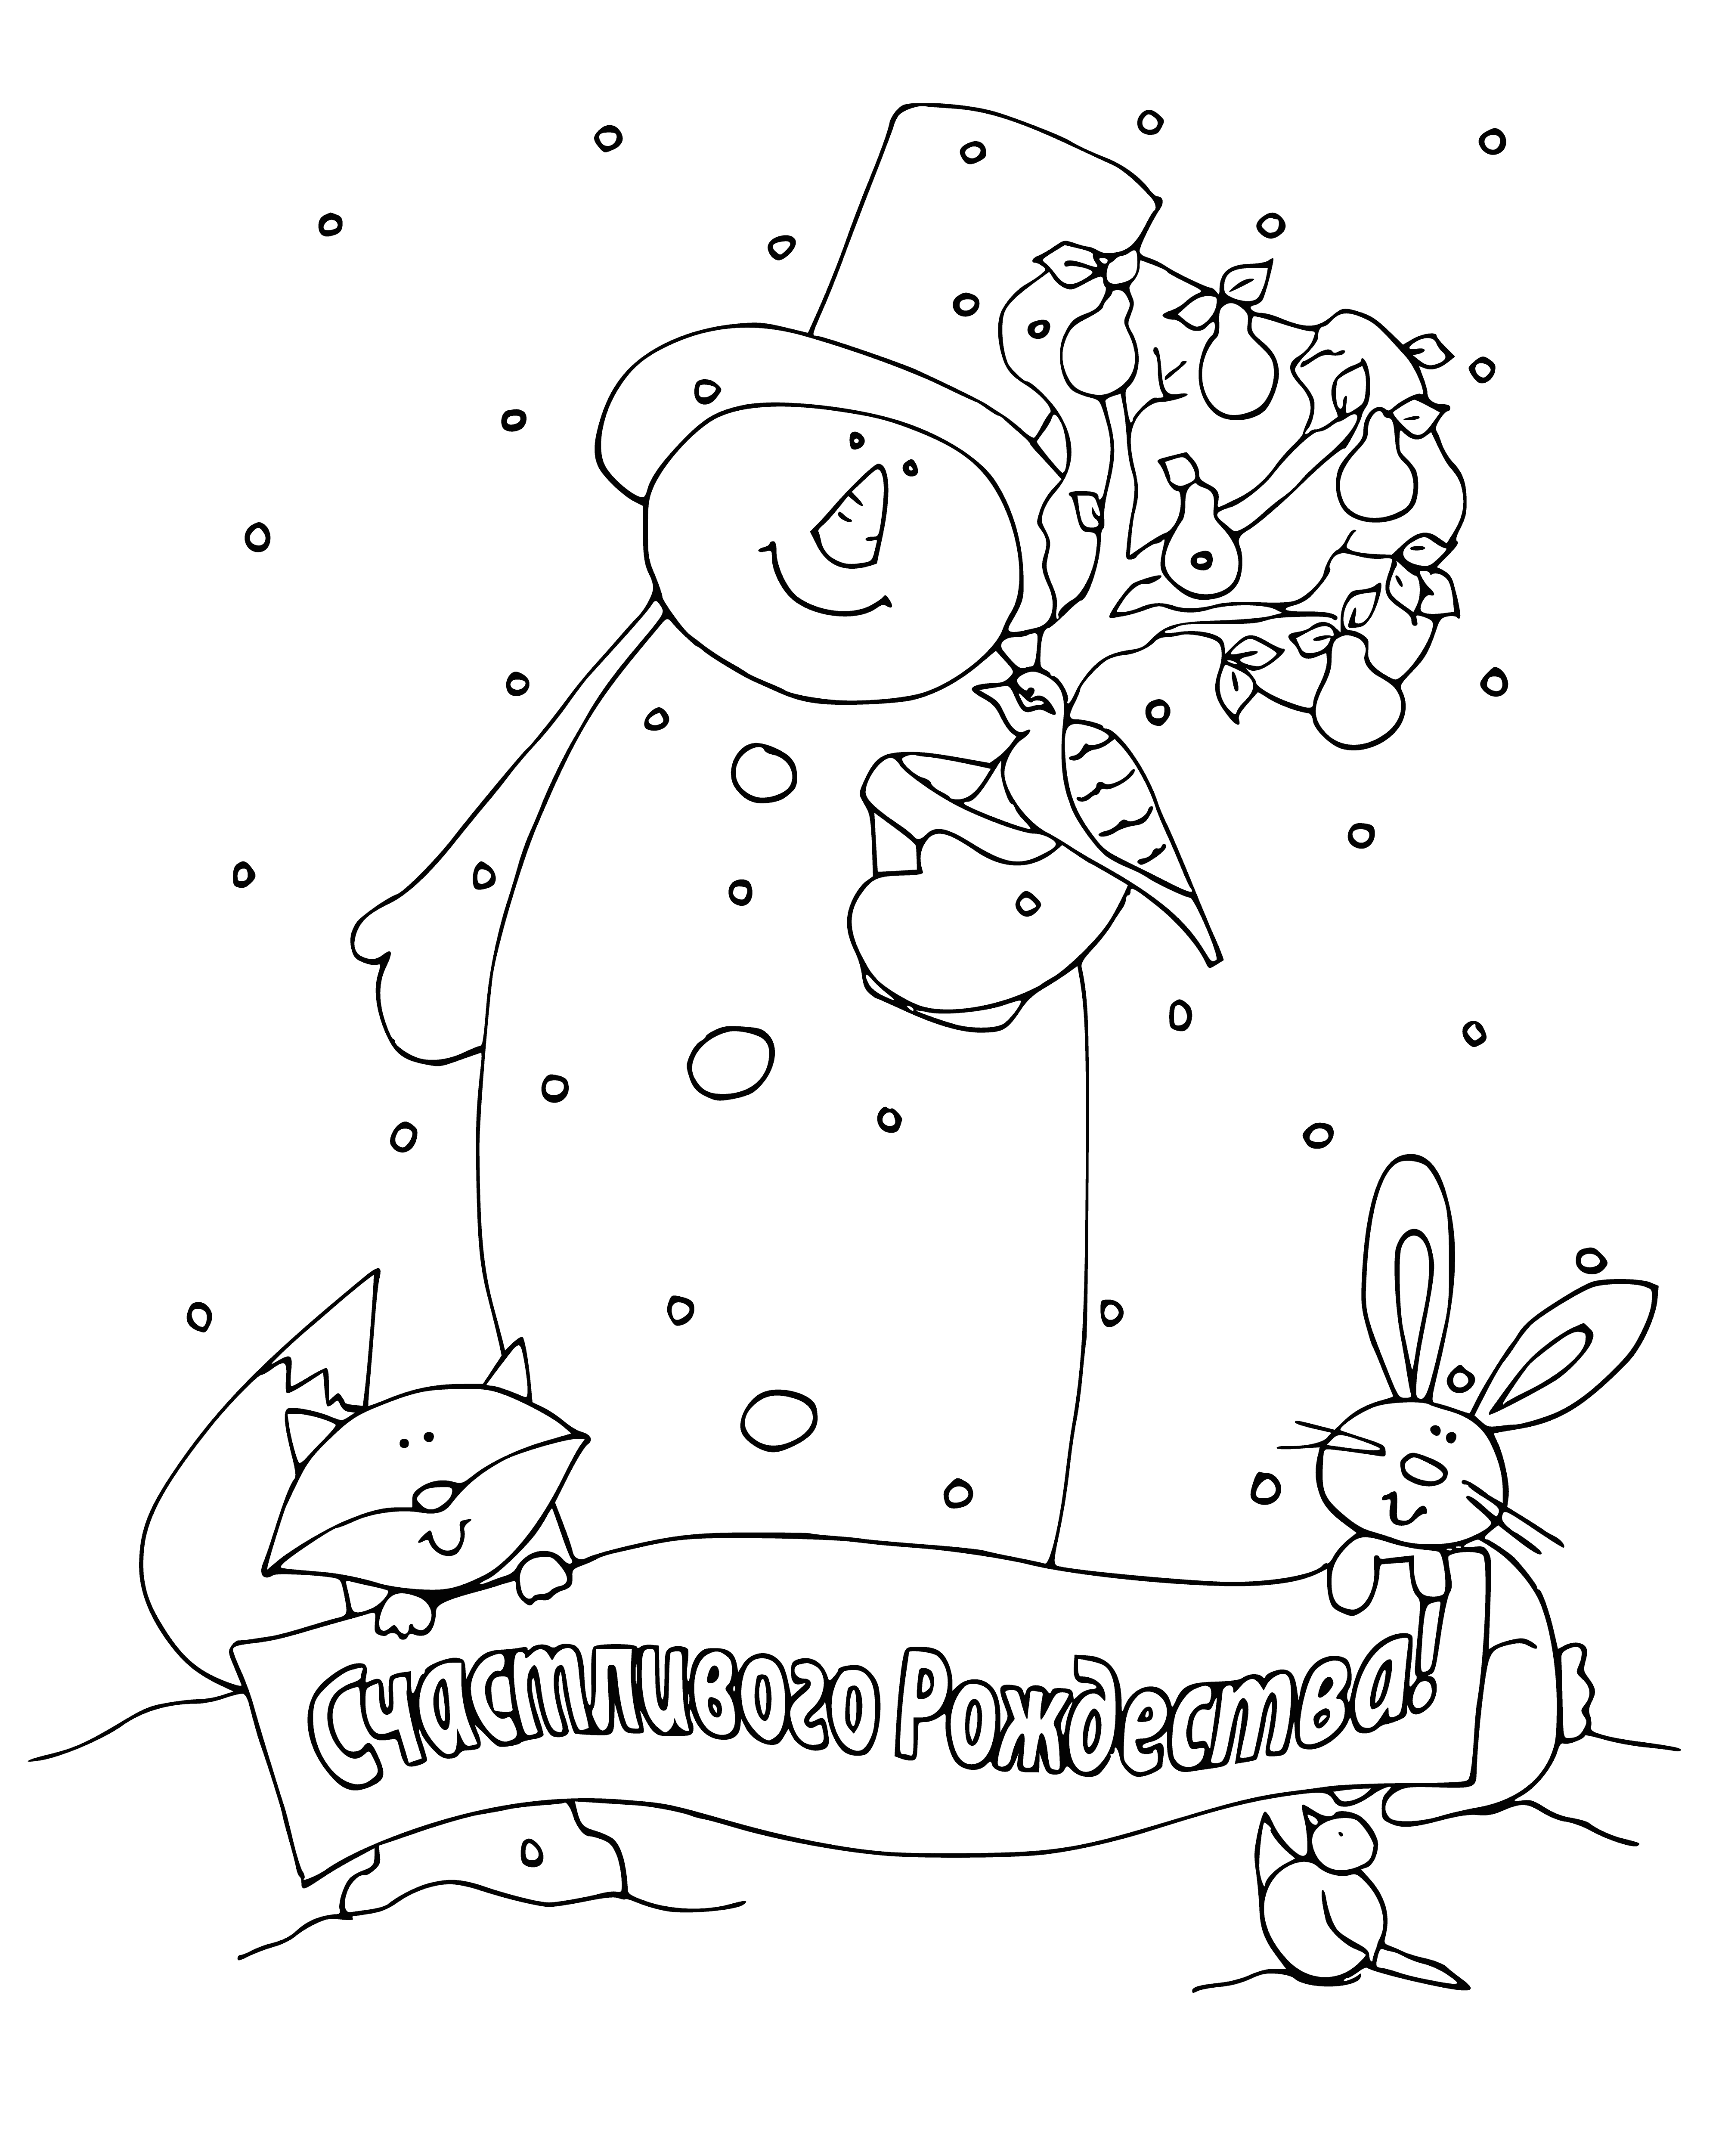 Two snowmen in coloring page: white, carrot nose, black eyes, hat. One holding sign: 